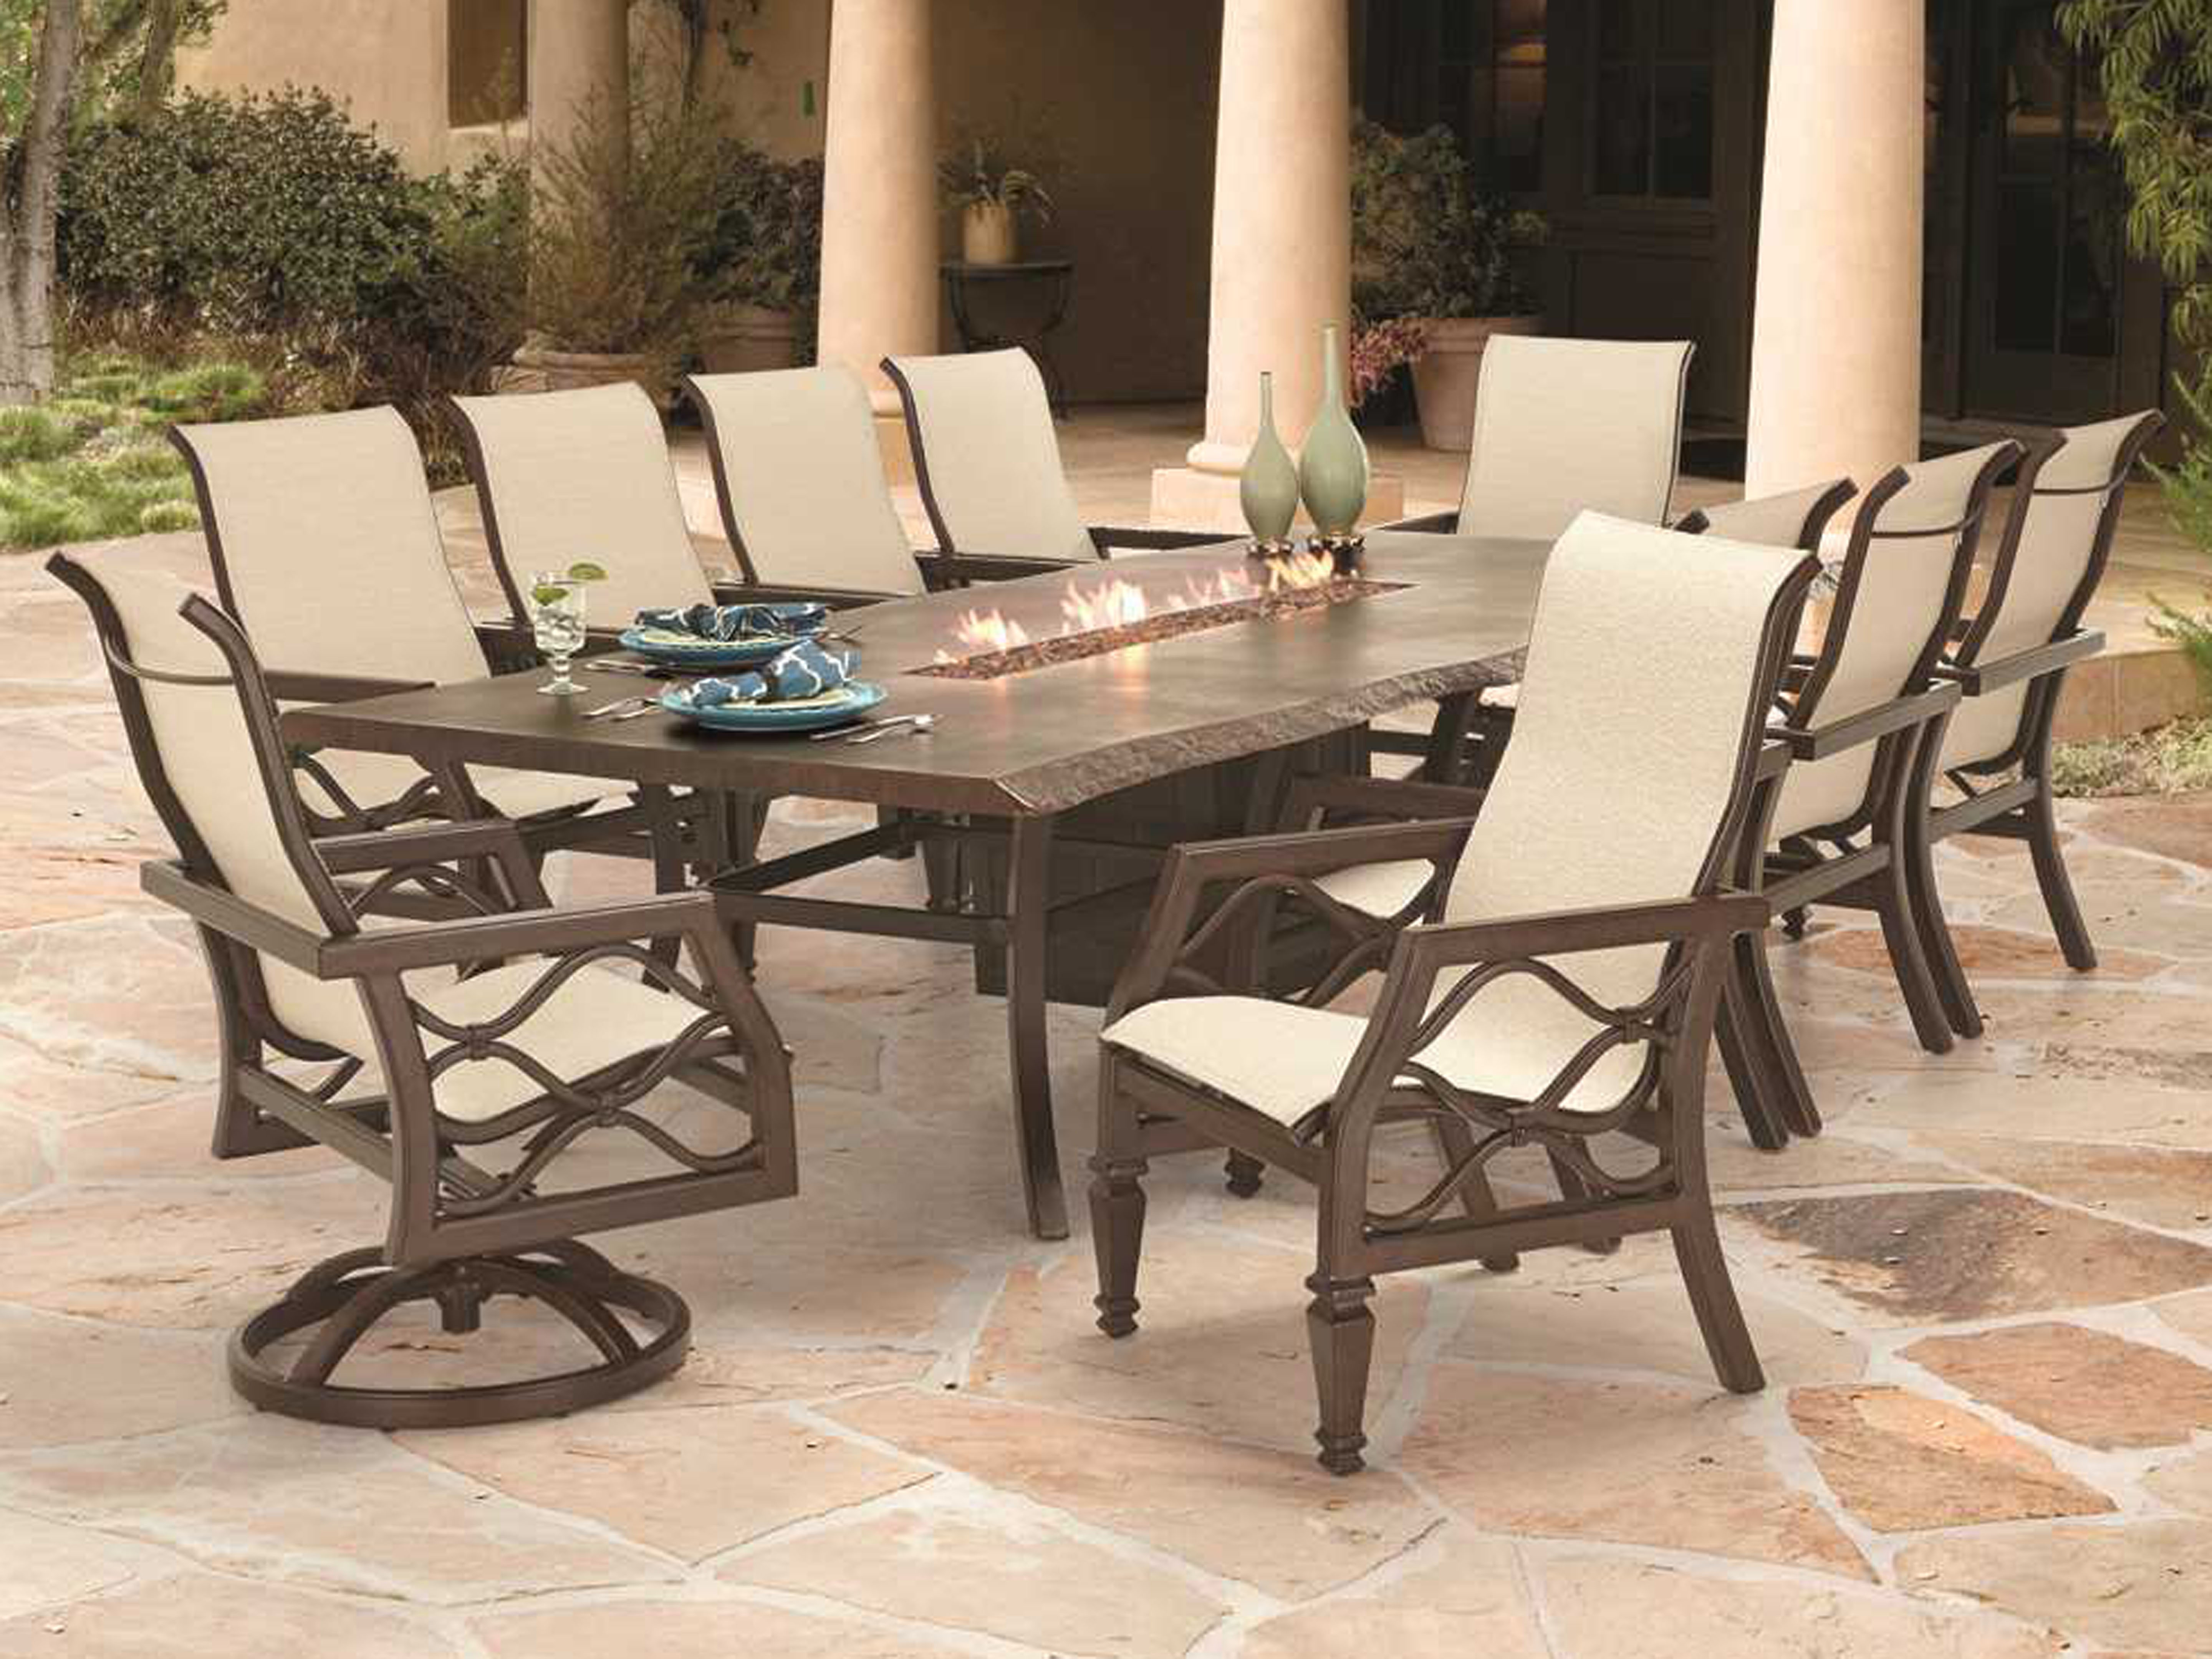 Castelle Villa Bianca Sling Cast, Outdoor Table With Fire Pit In Middle